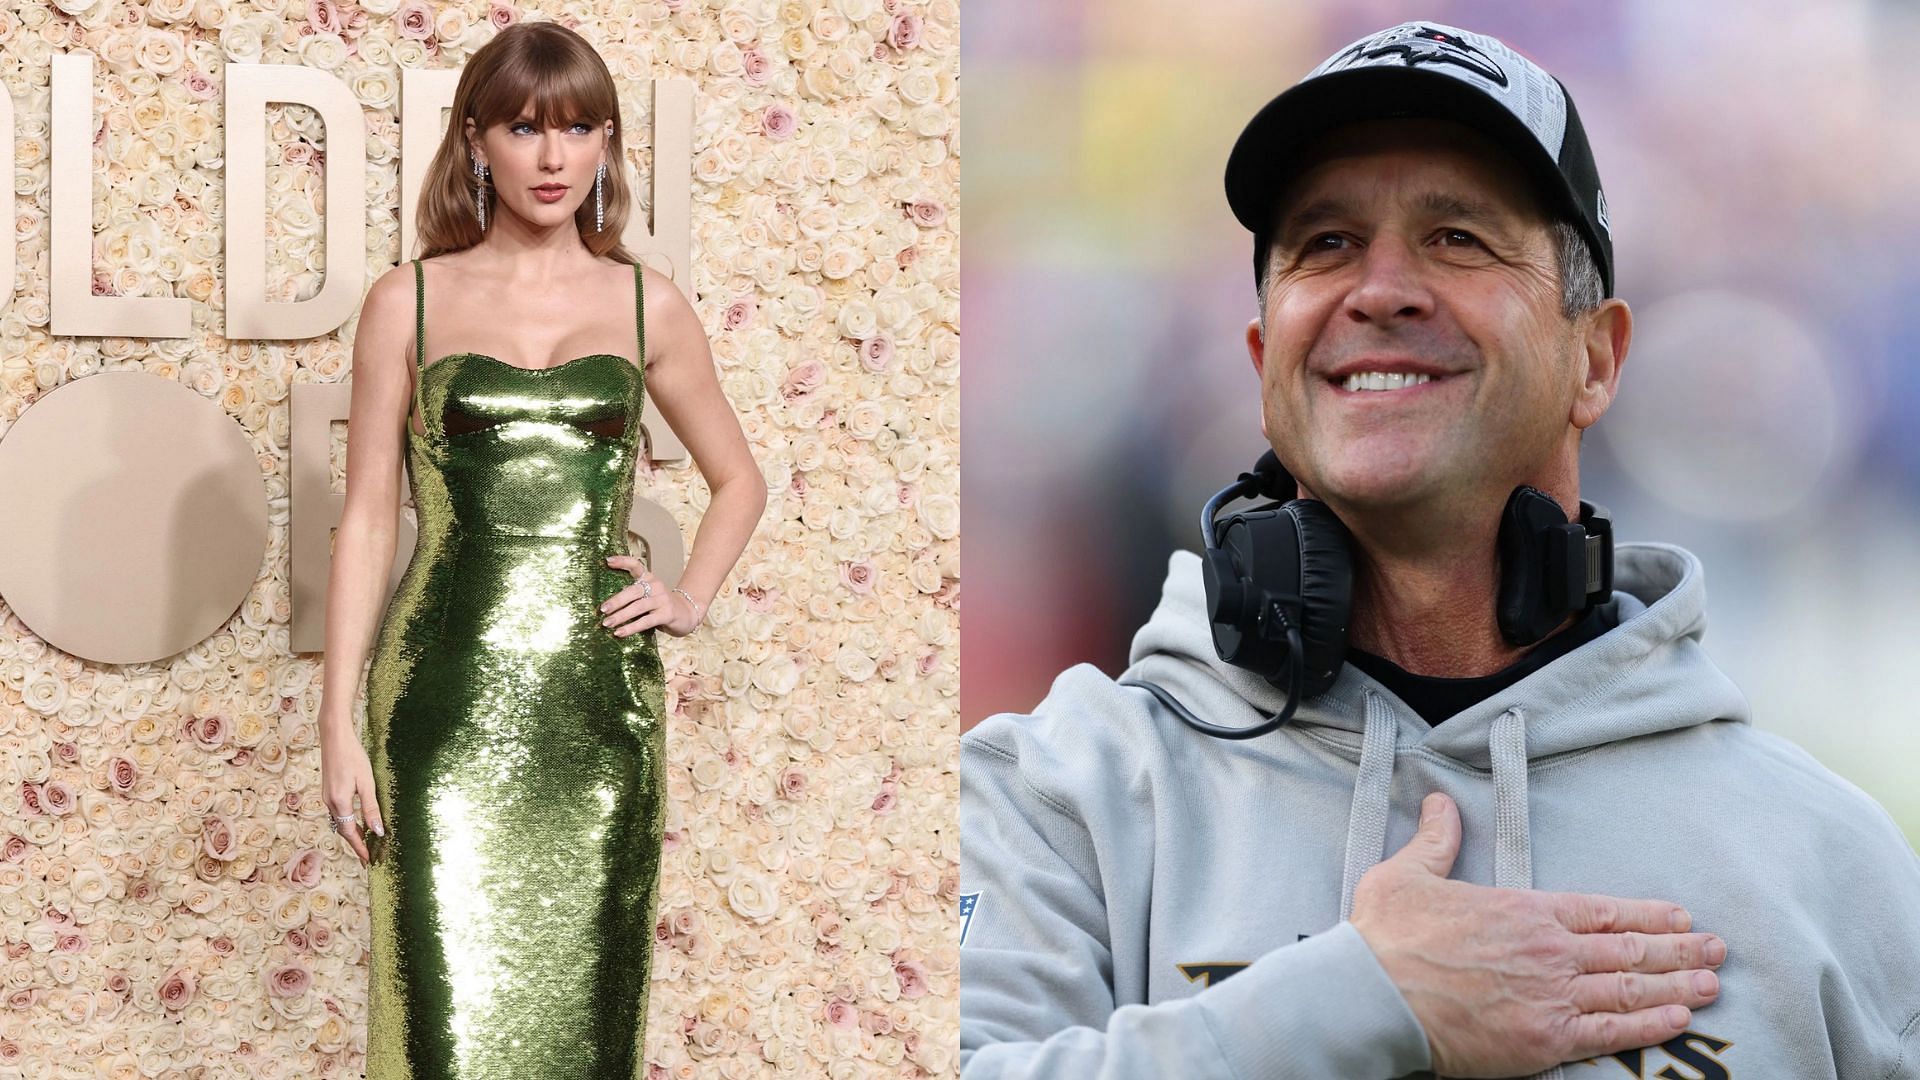 John Harbaugh has some things to admit about Taylor Swift